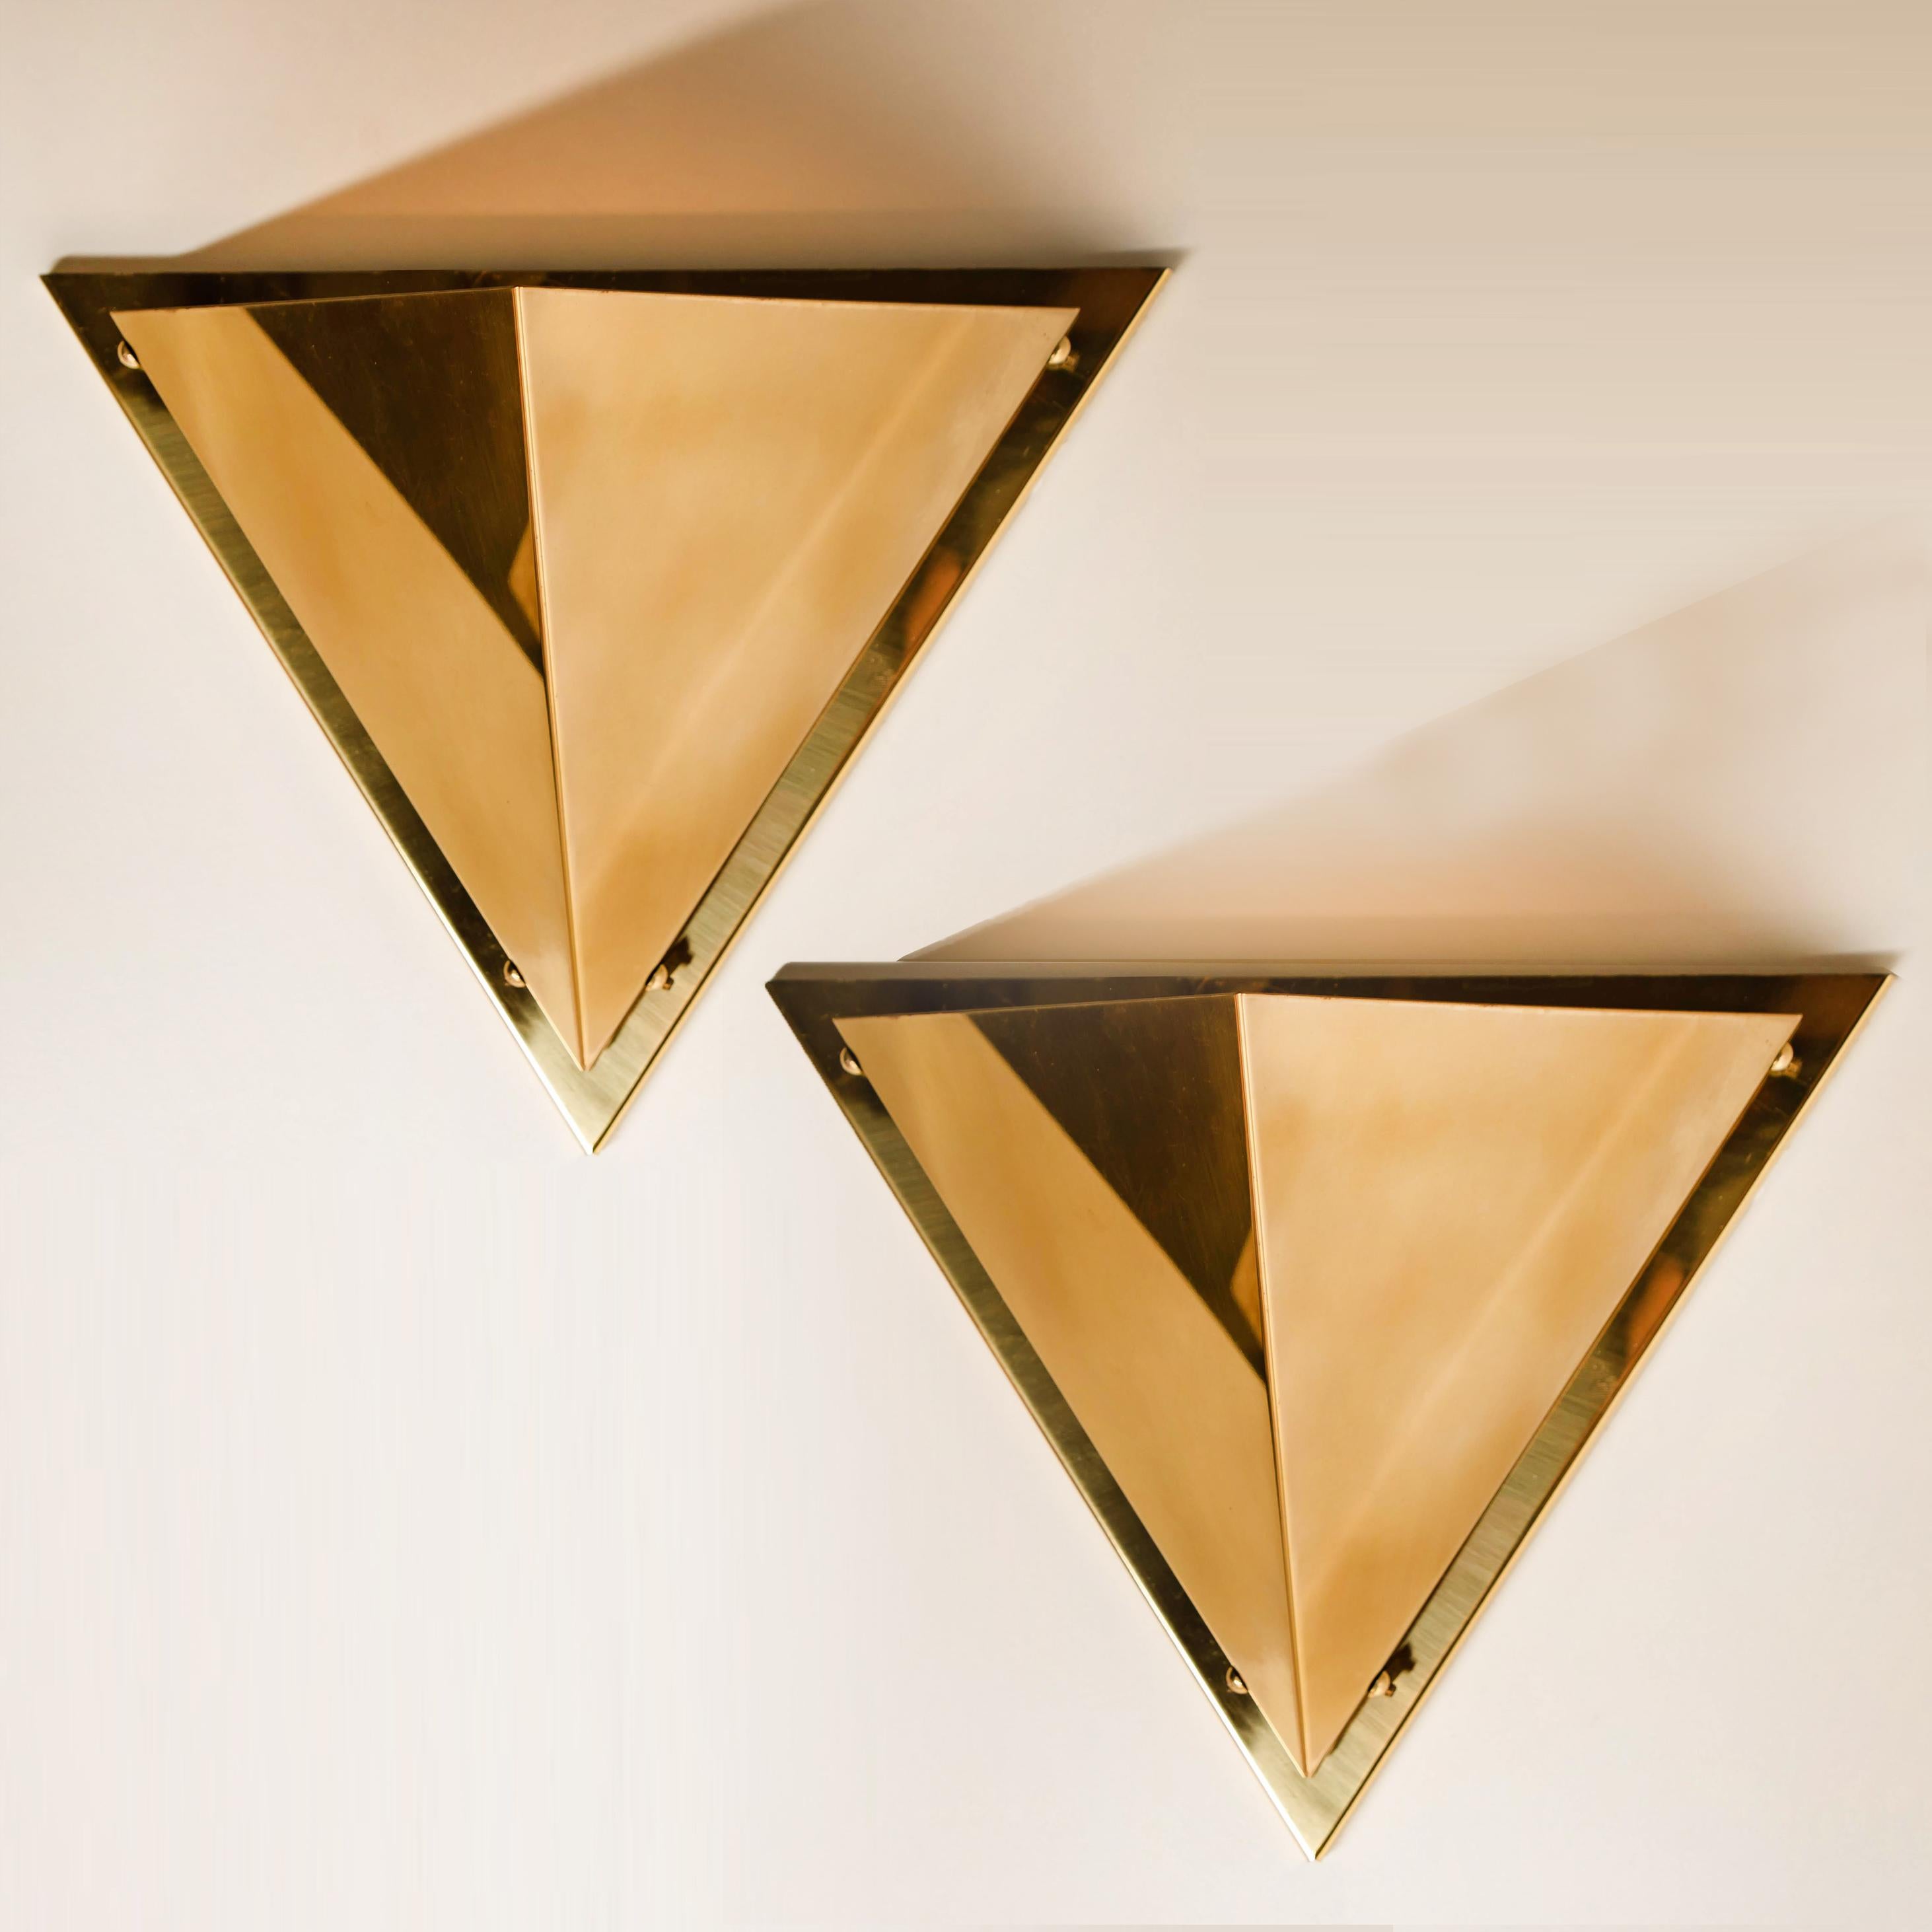 1 of the 5 Pyramid Shaped Massive Brass Wall Lamps, 1970s